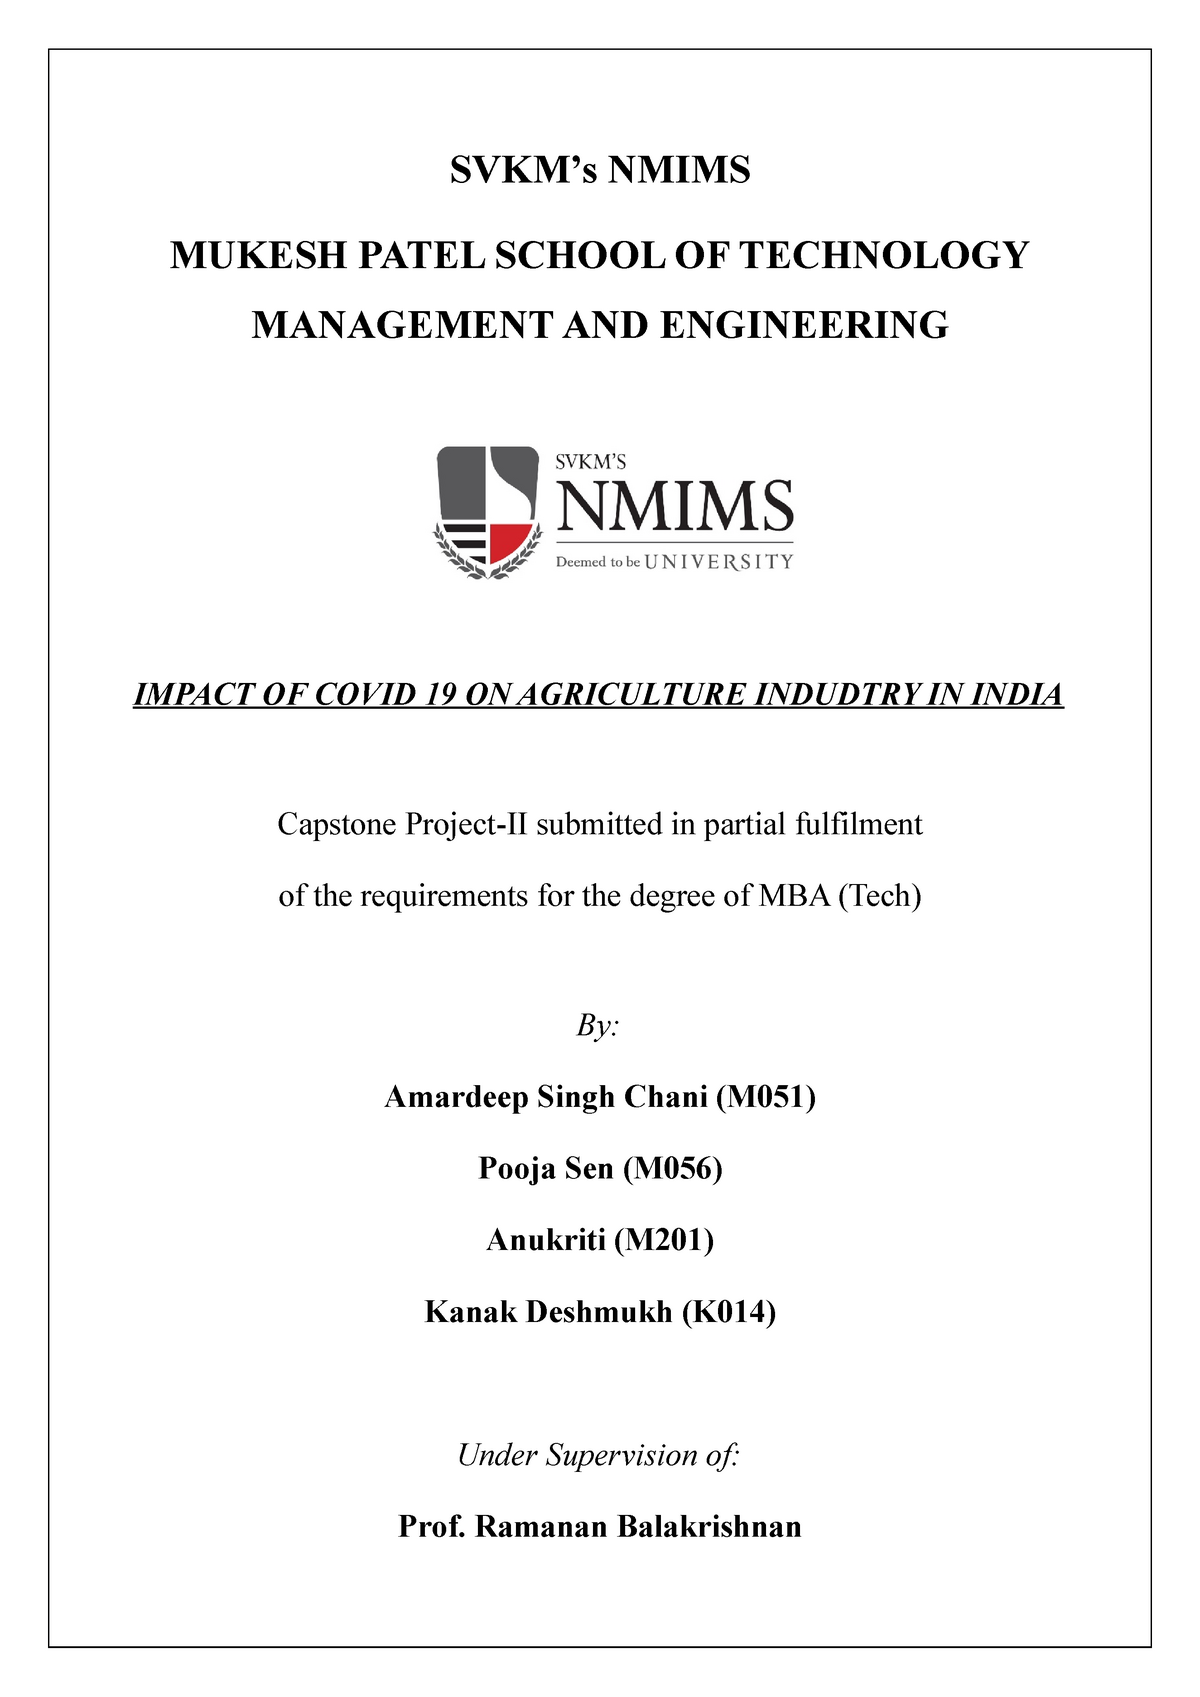 mba capstone project examples pdf